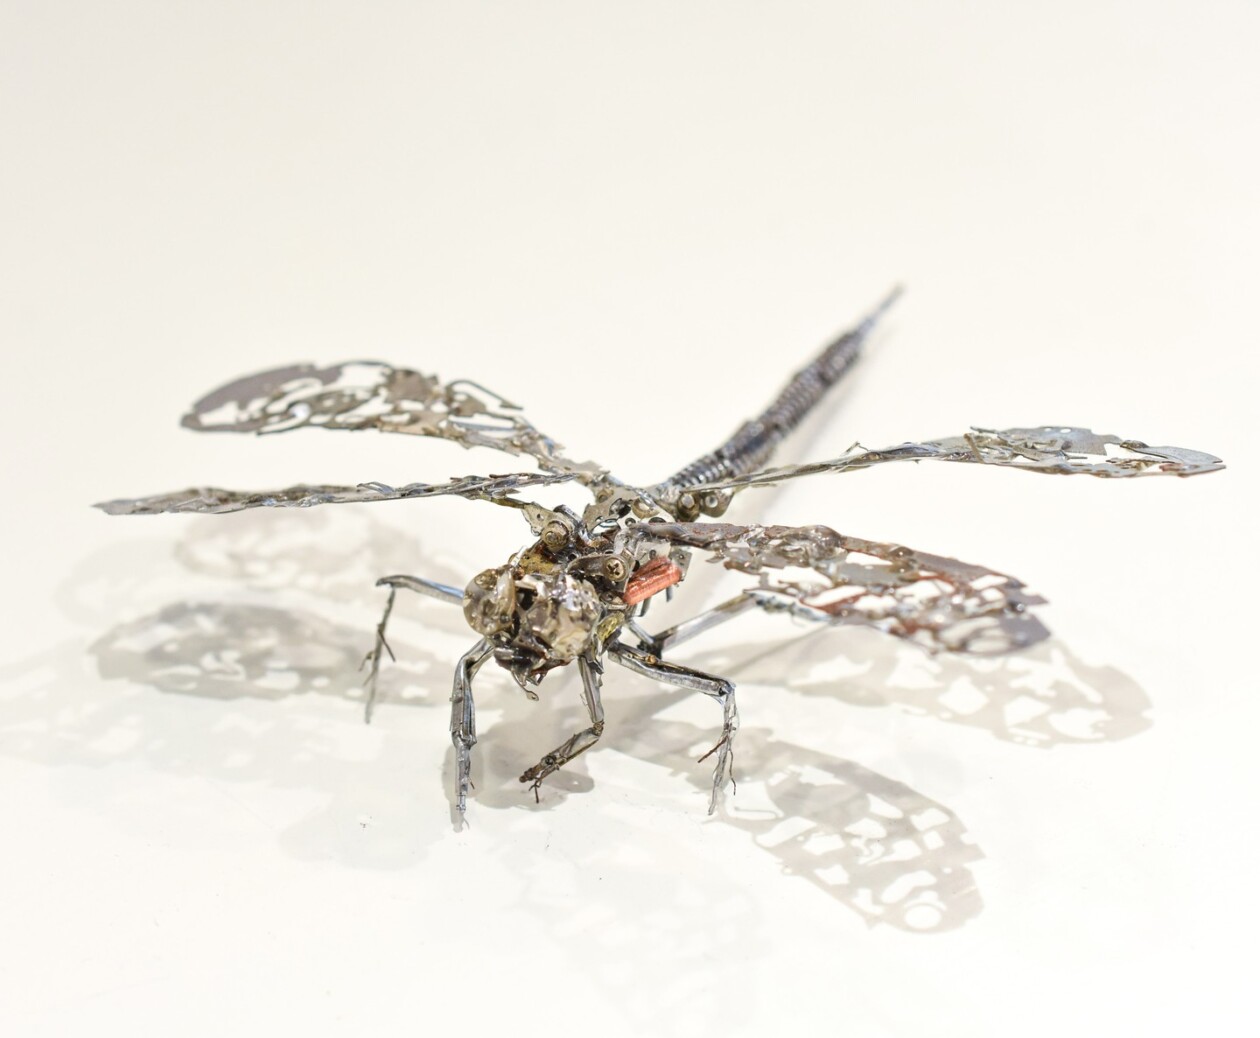 Spare Parts Of Clocks And Glasses Upcycled Into Incredible Animal Sculptures By Megane Tokei Ito (15)